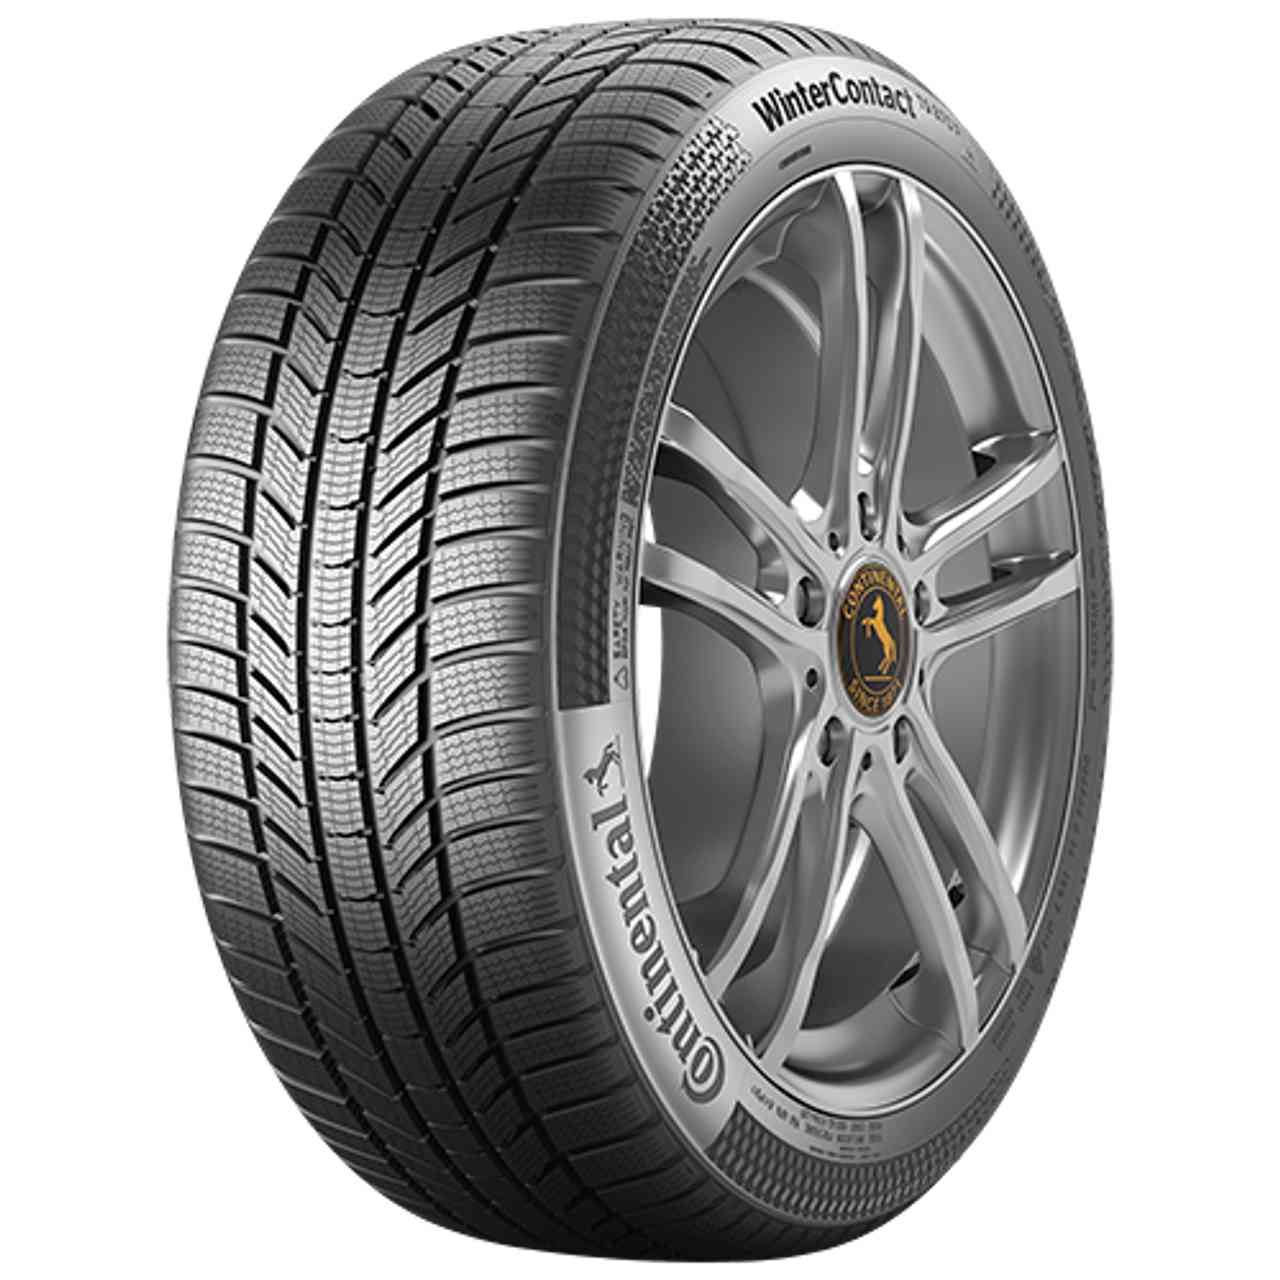 CONTINENTAL WINTERCONTACT TS 870 P (EVc) 245/45R21 104V FR BSW